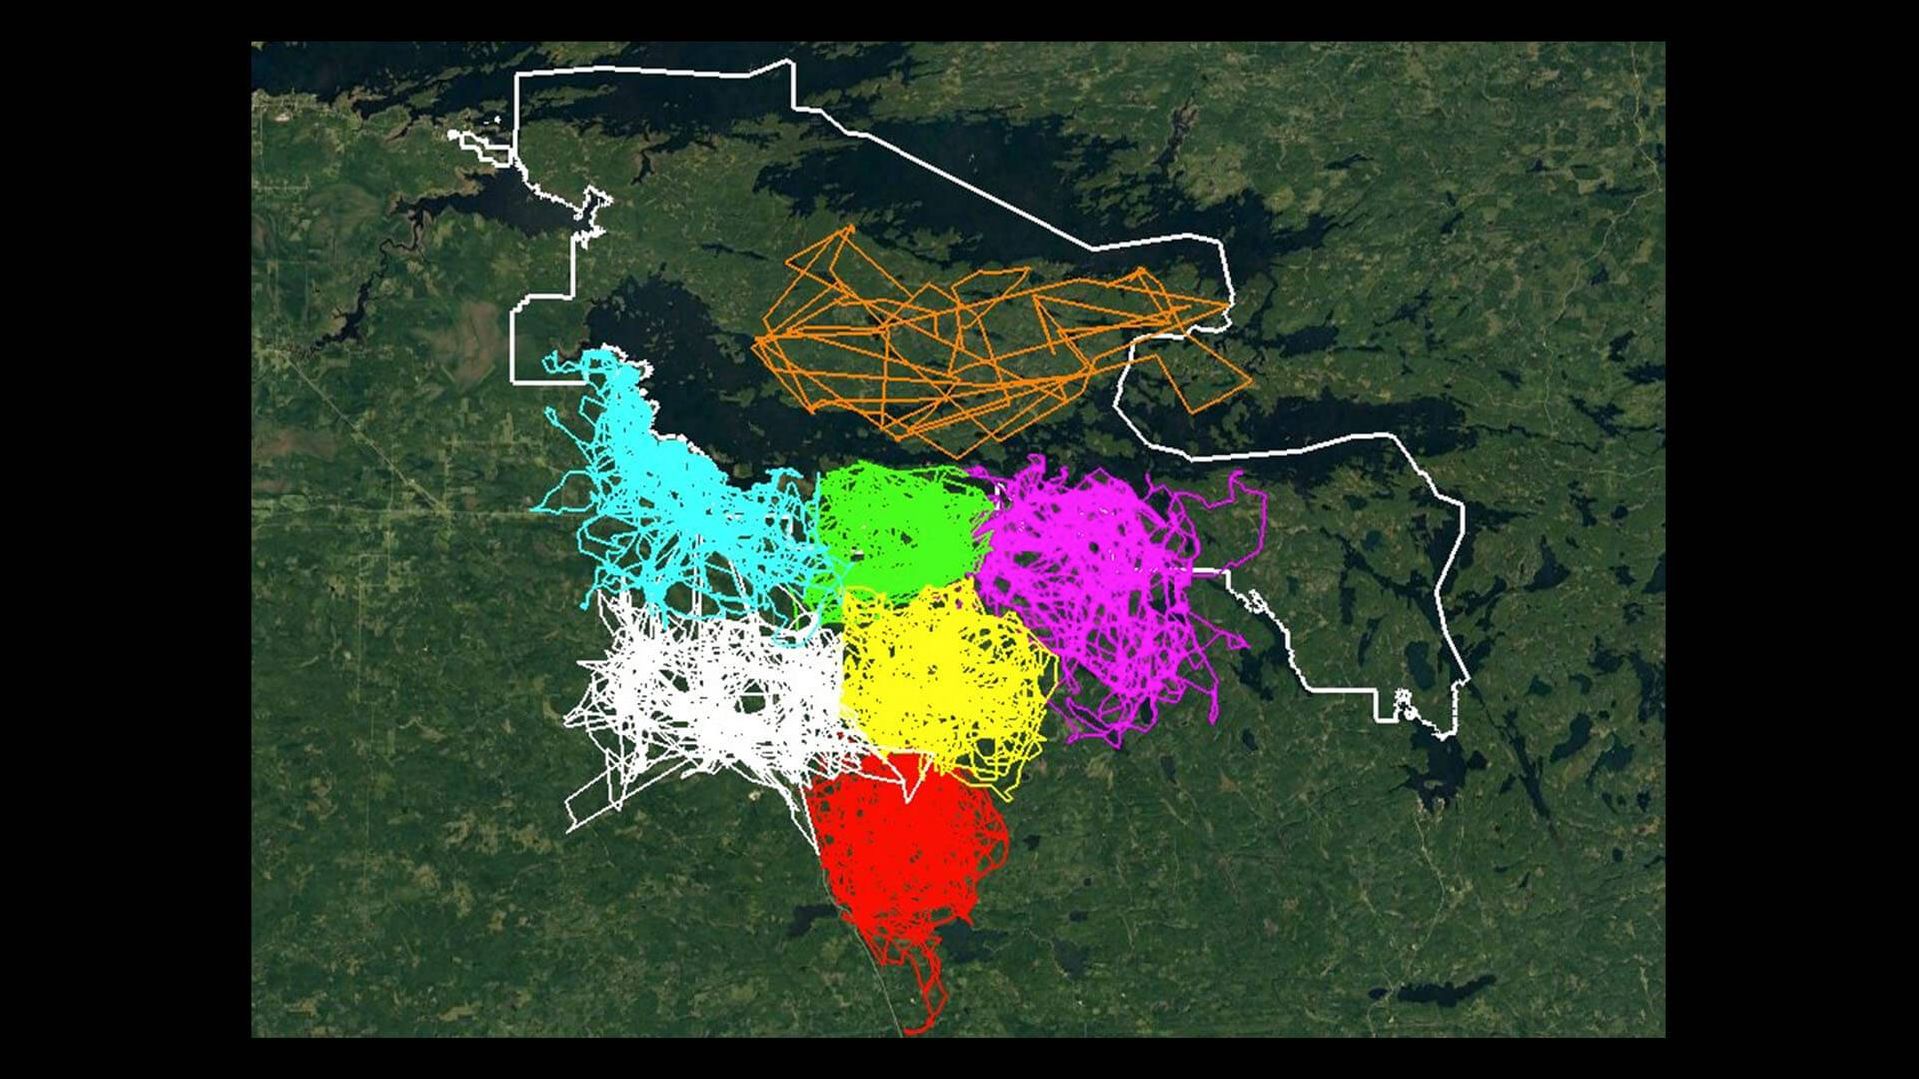 GPS data showing the territories of various wolf packs in and around Voyageurs National Park